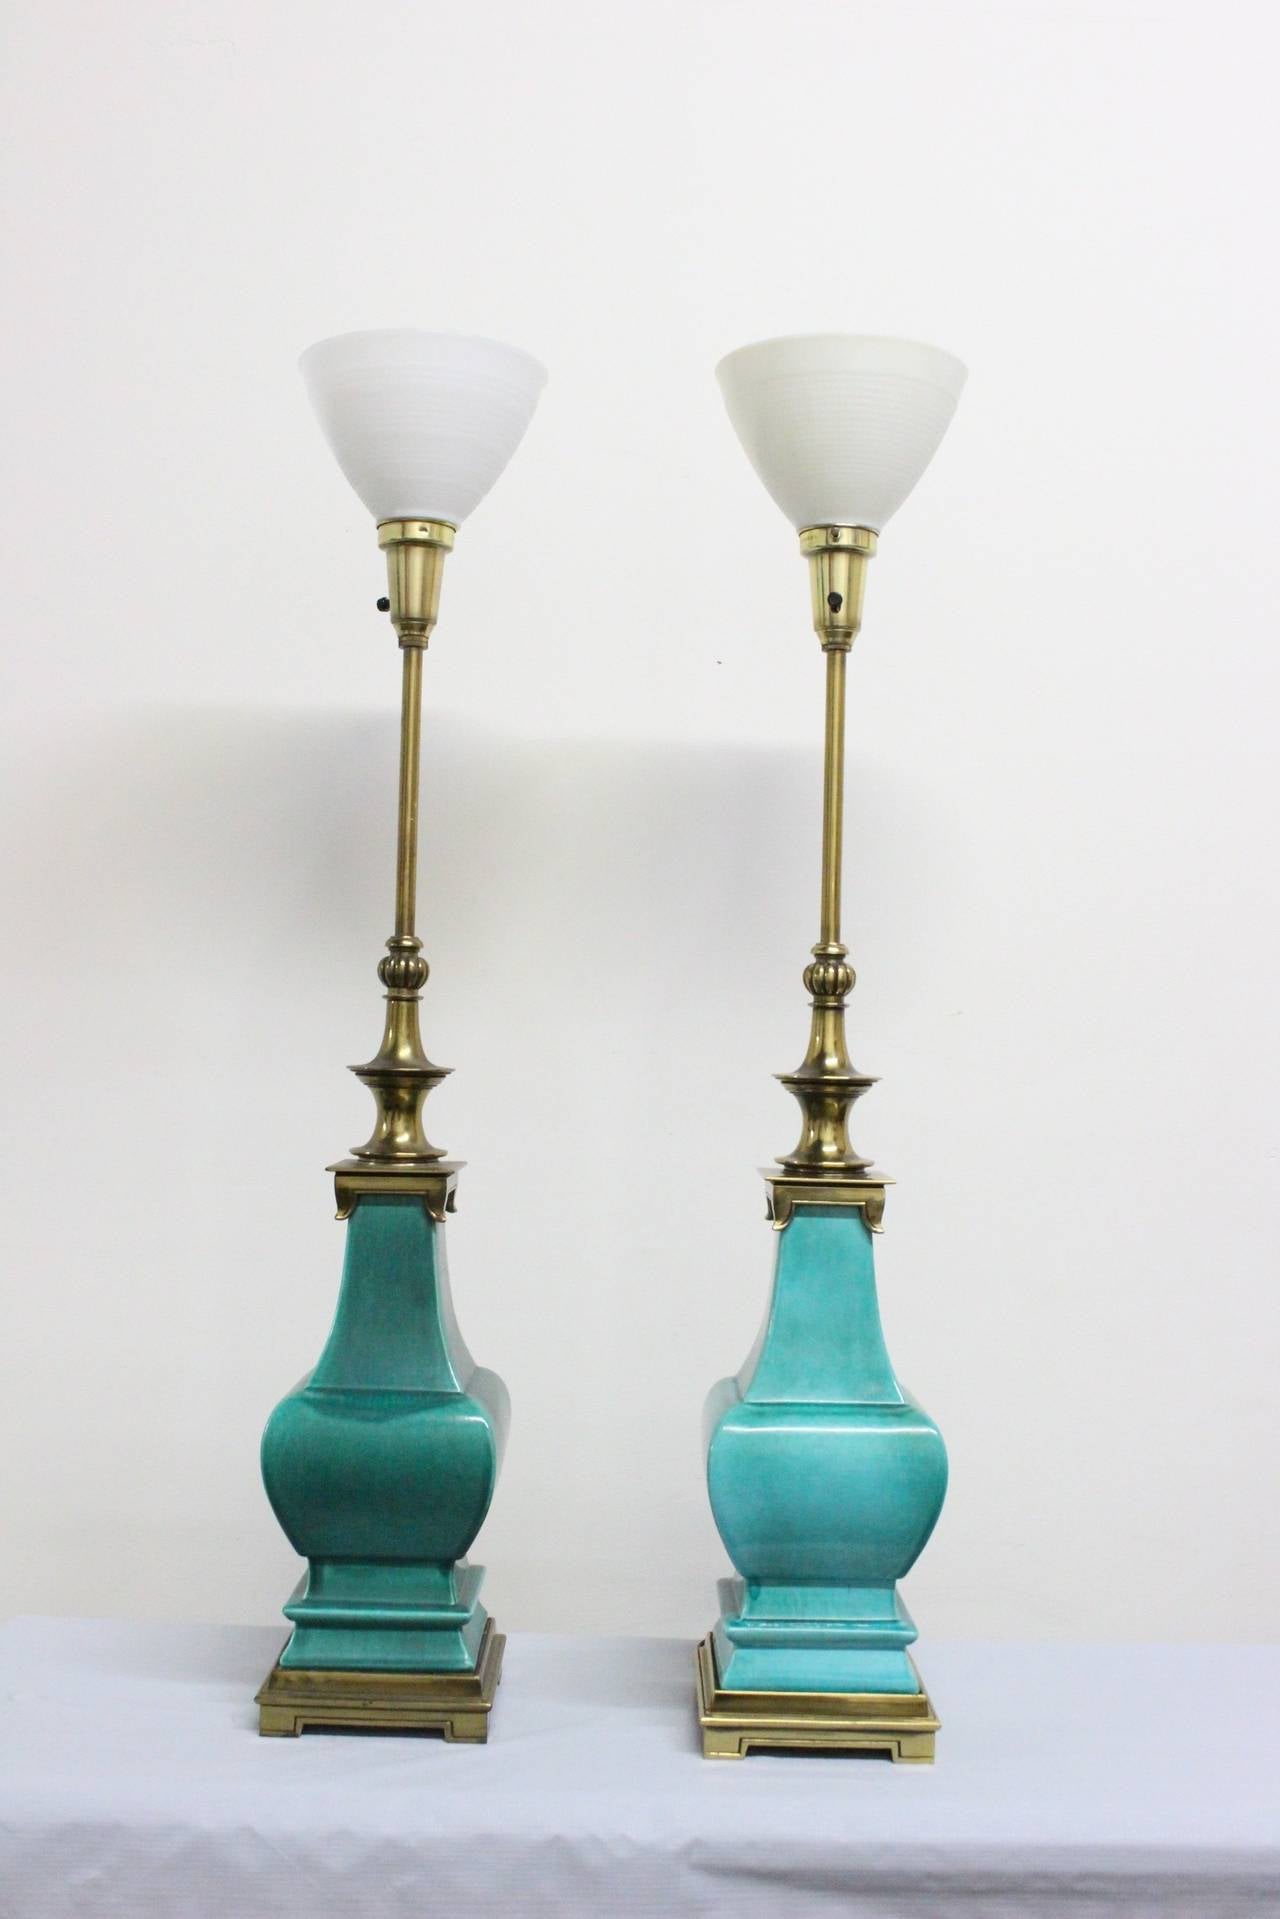 Pair of Stiffel porcelain glazed lamps. Lamps have brass bases and necks with torchiere tops, circa 1960s.

Dimensions: 7" x 7" x 42".